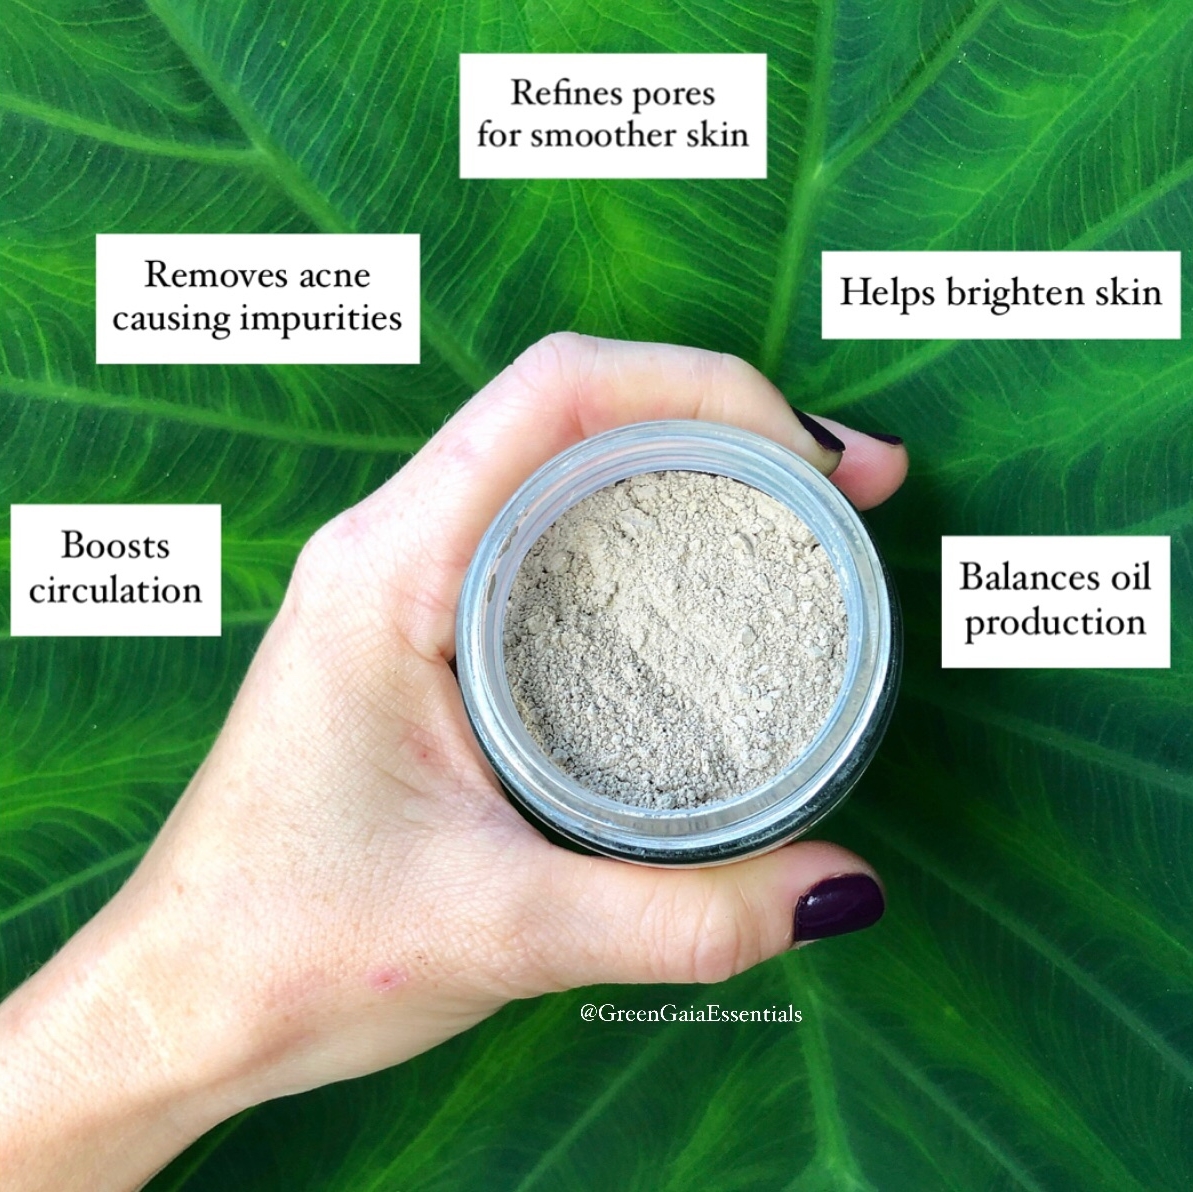 Clay masks offer many benefits for your skin while also delivering nutrients to the skin.

#GreenGaiaEssentials #WomanOwnedBusiness #FemaleEmpowerment #BusinessForChange #OrganicSkinCare #GuidedSTL #StLouis #YogaGirlFoundation #314Together #CrueltyFree #Vegan